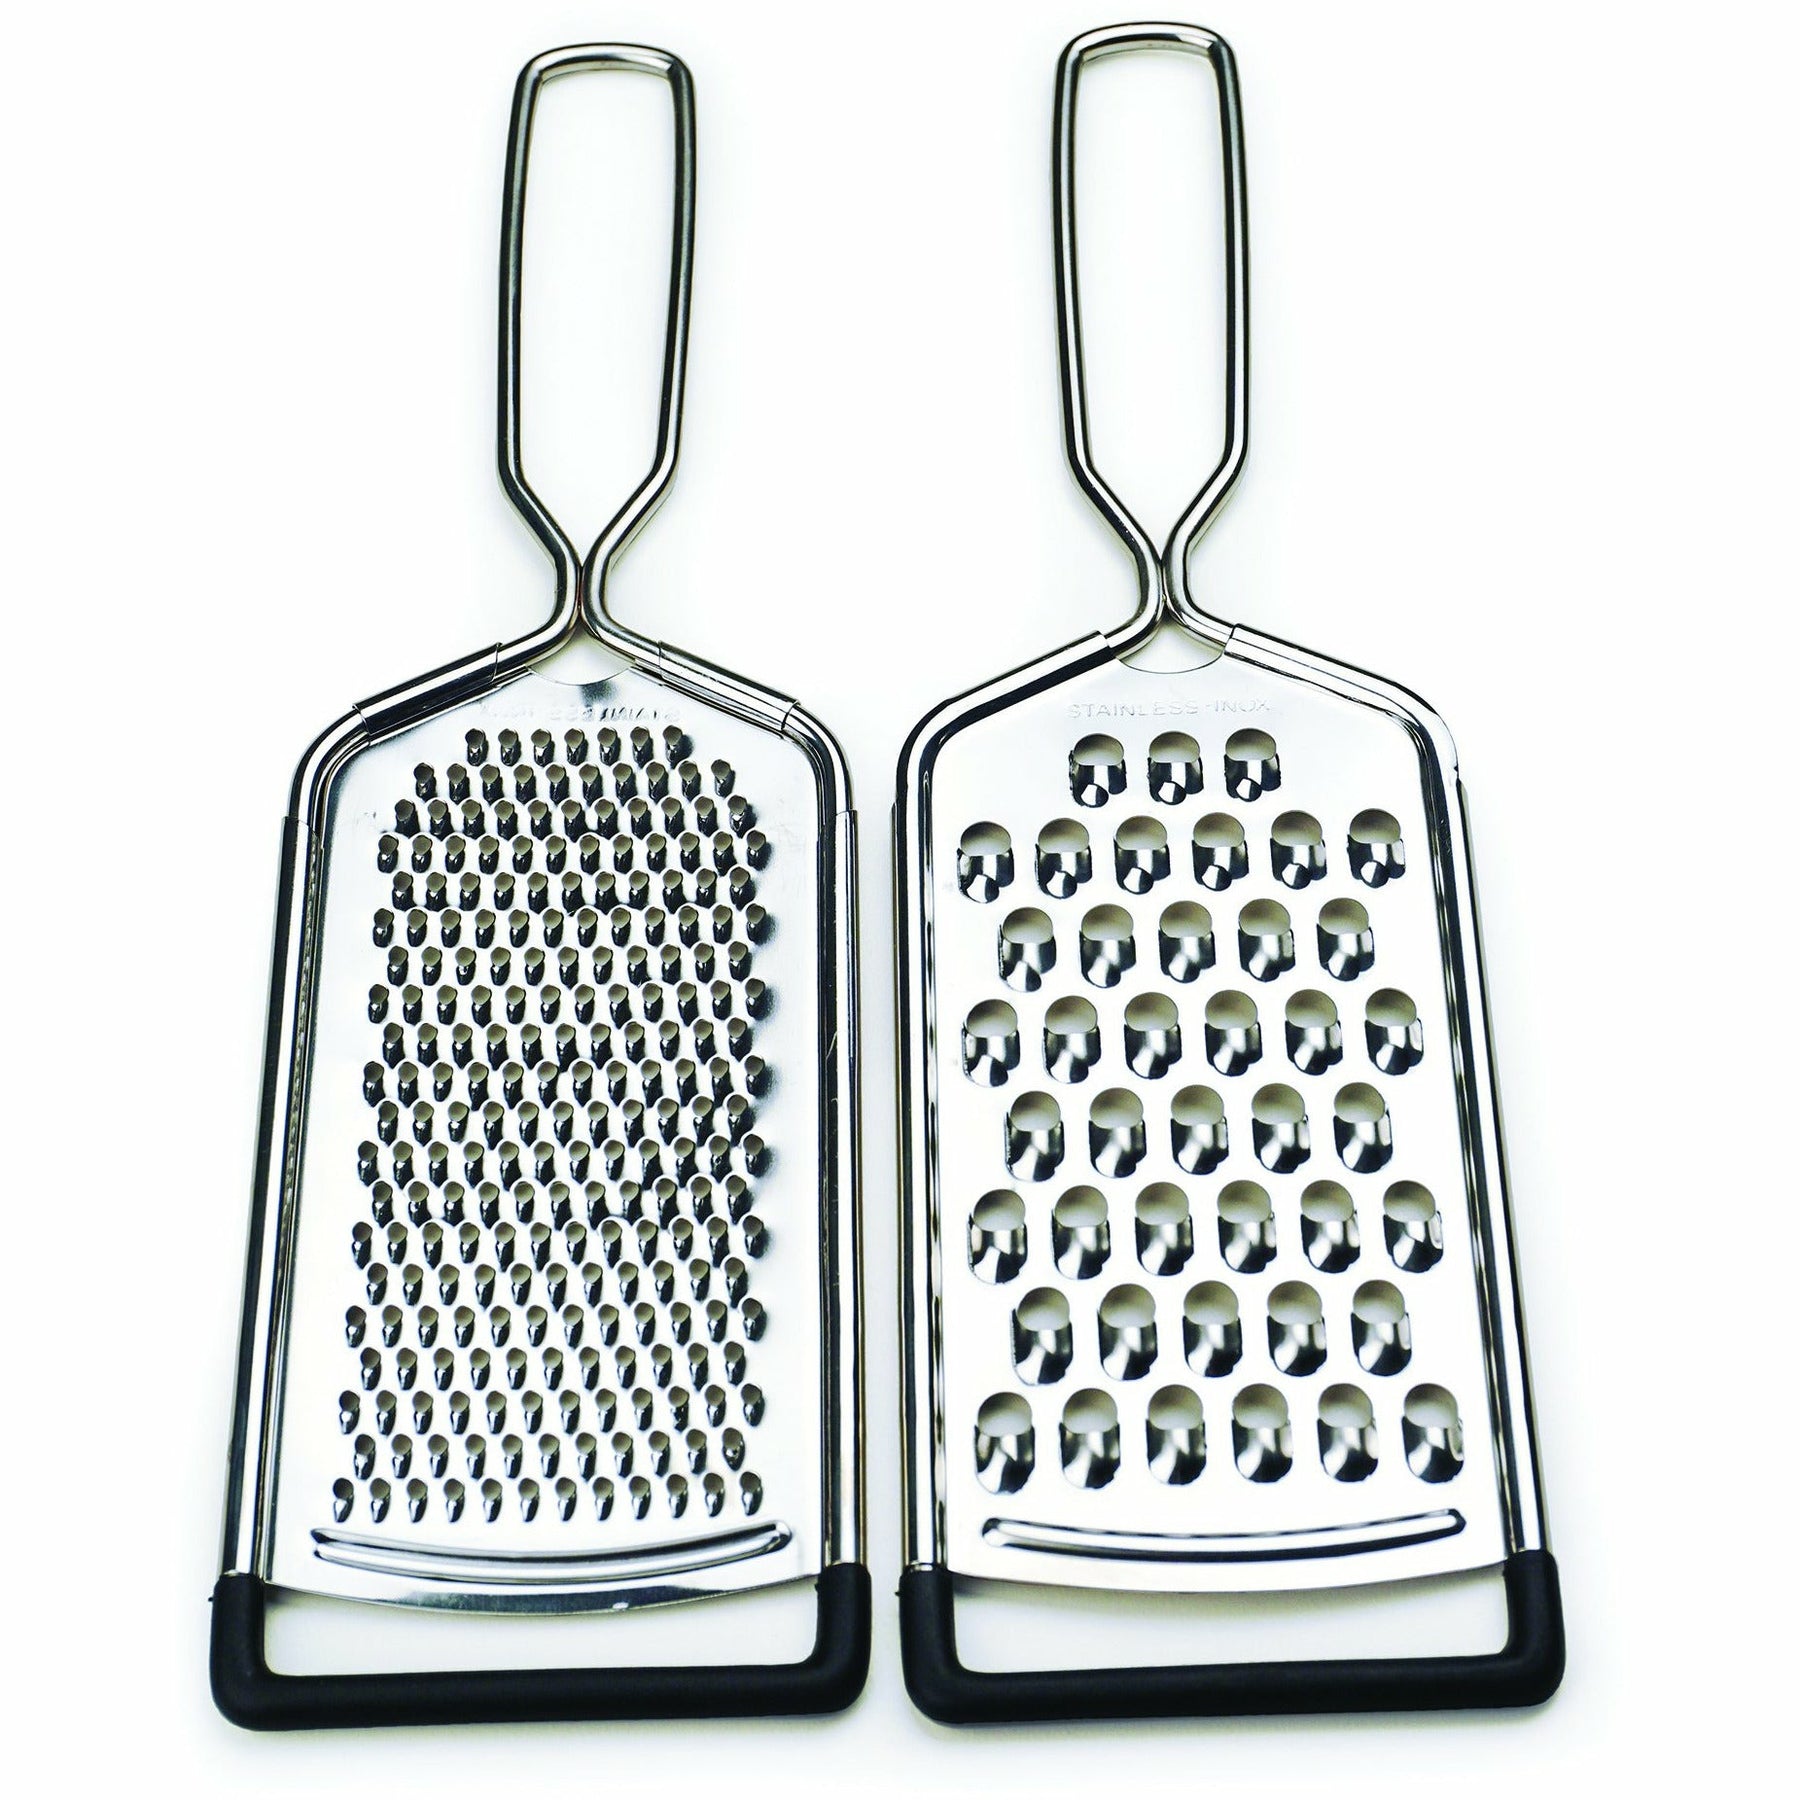 Fante's Cousin Nico's Suction Base Cheese Grater - Fante's Kitchen